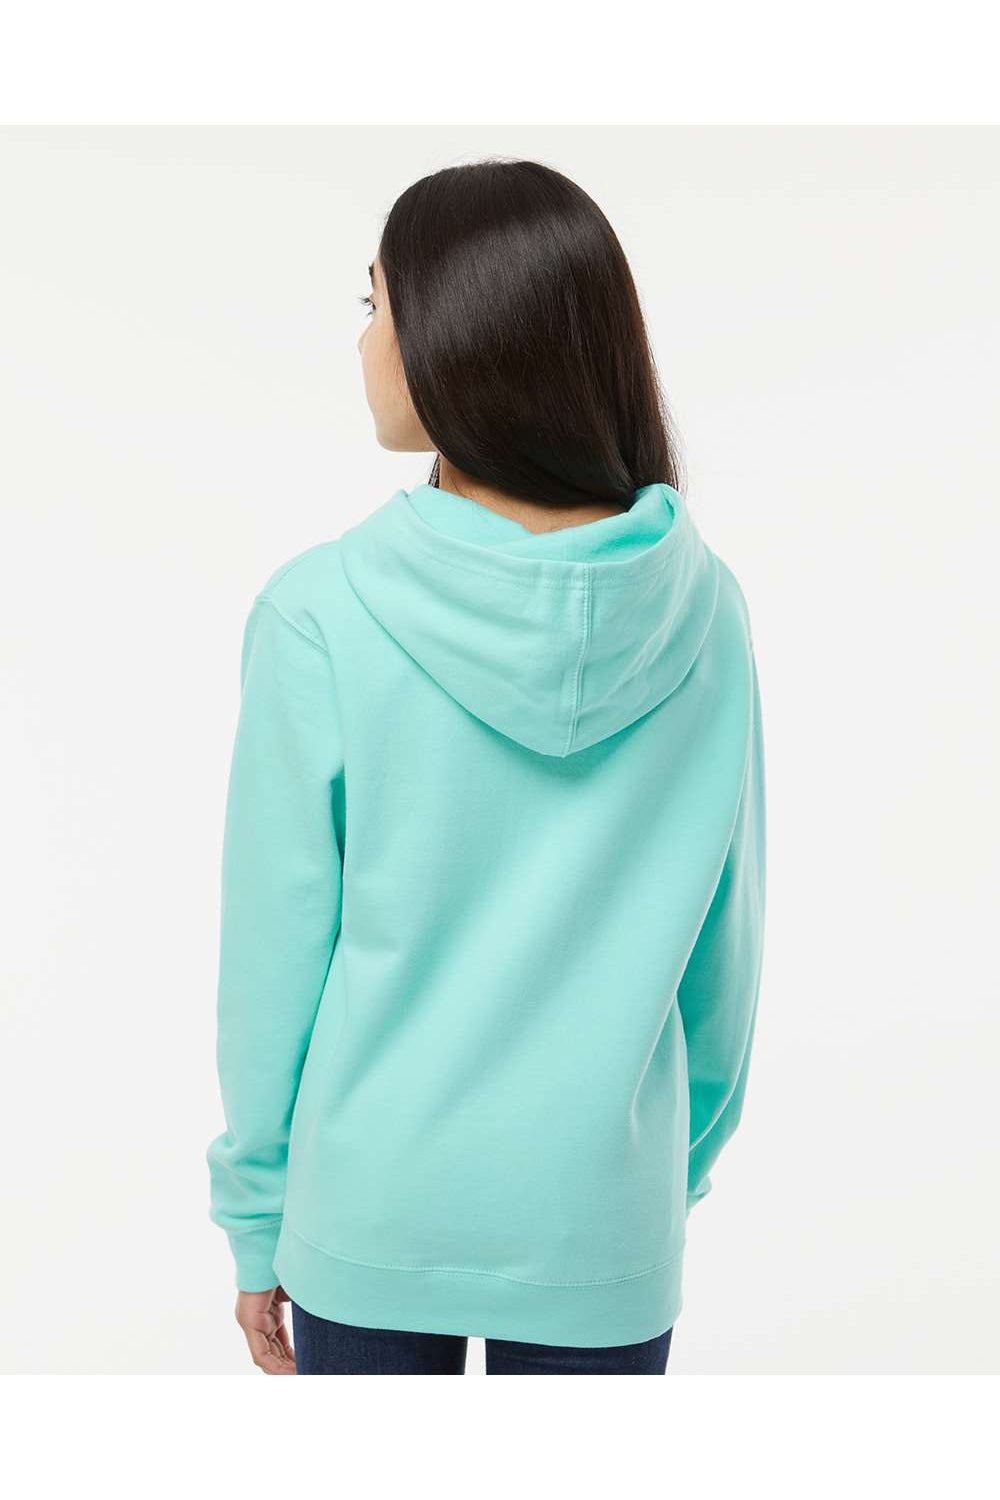 Independent Trading Co. SS4001Y Youth Hooded Sweatshirt Hoodie Mint Green Model Back